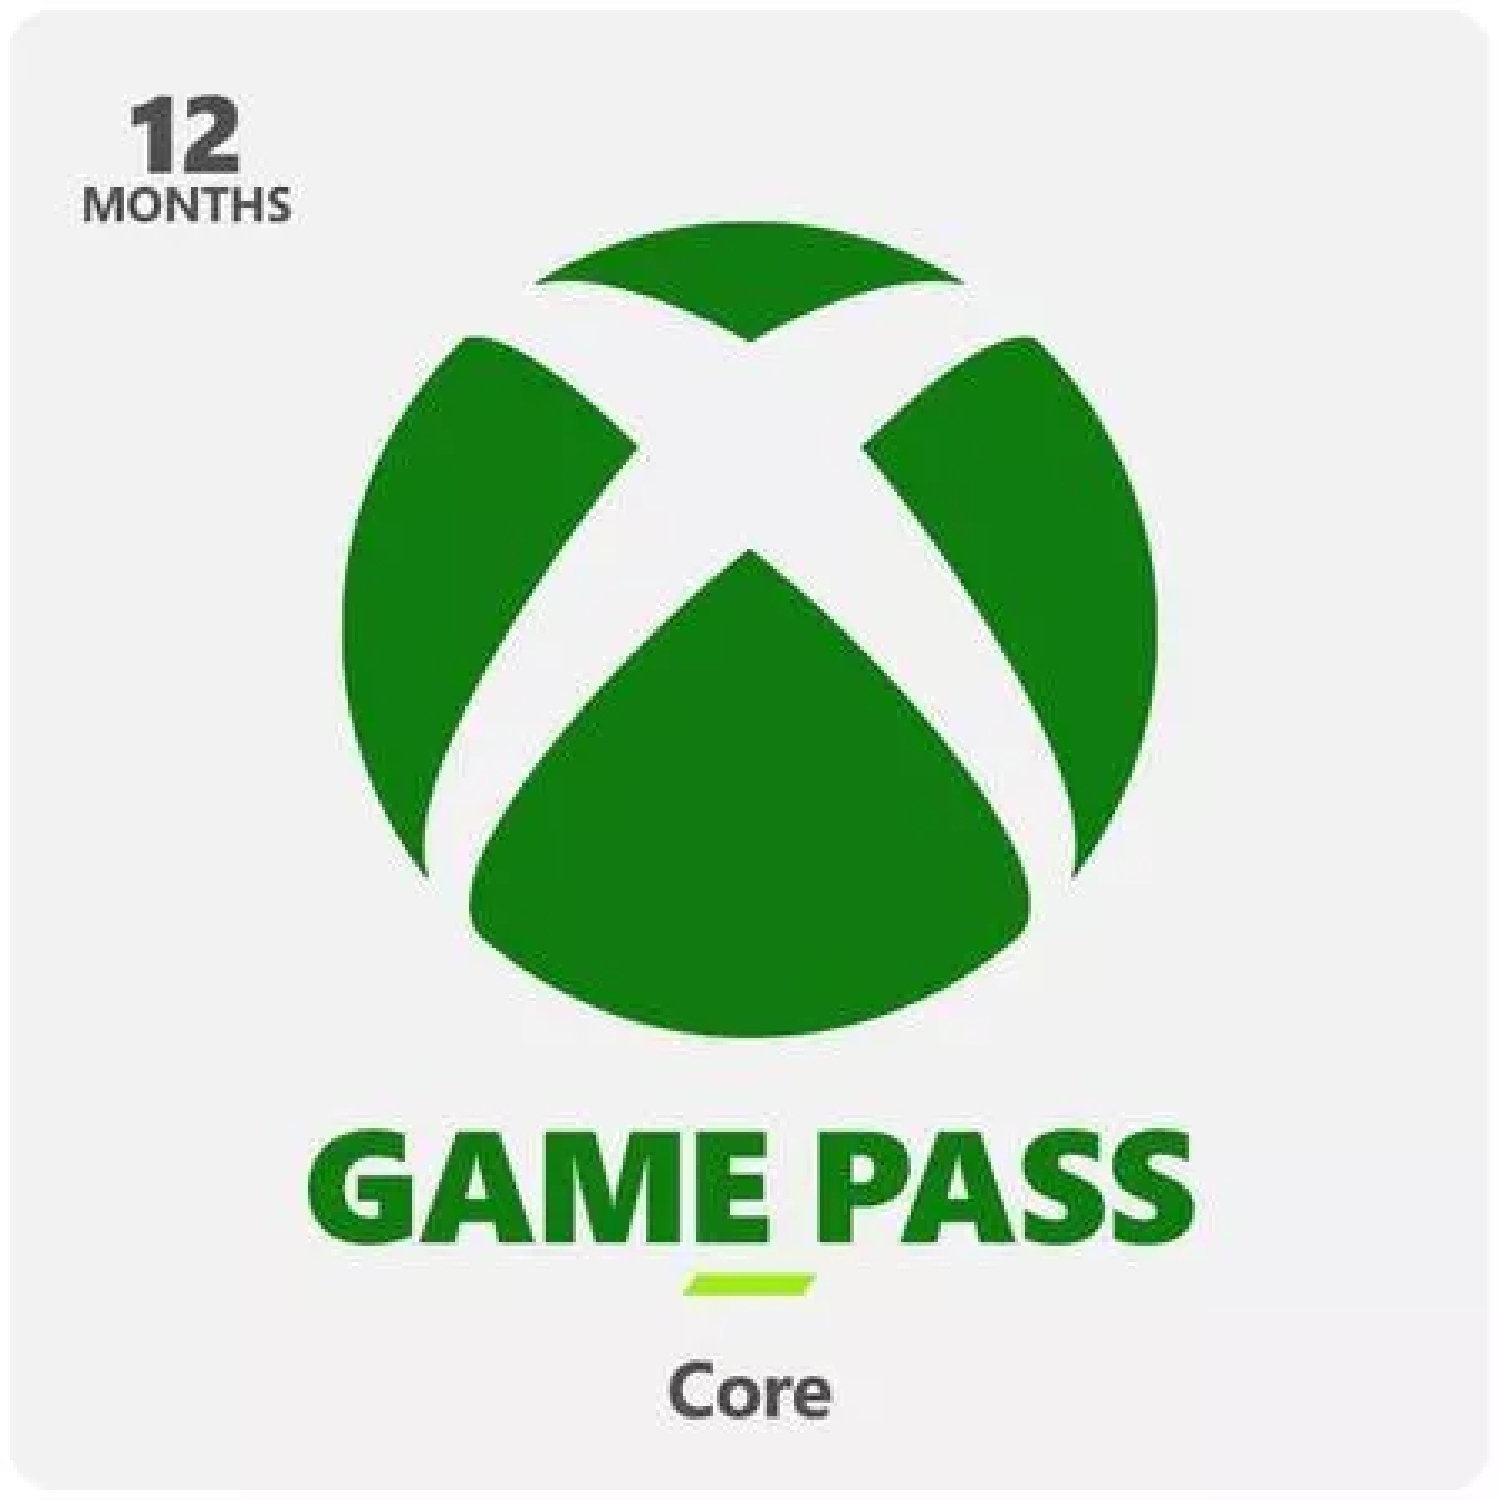 Image of Xbox Game Pass Core.